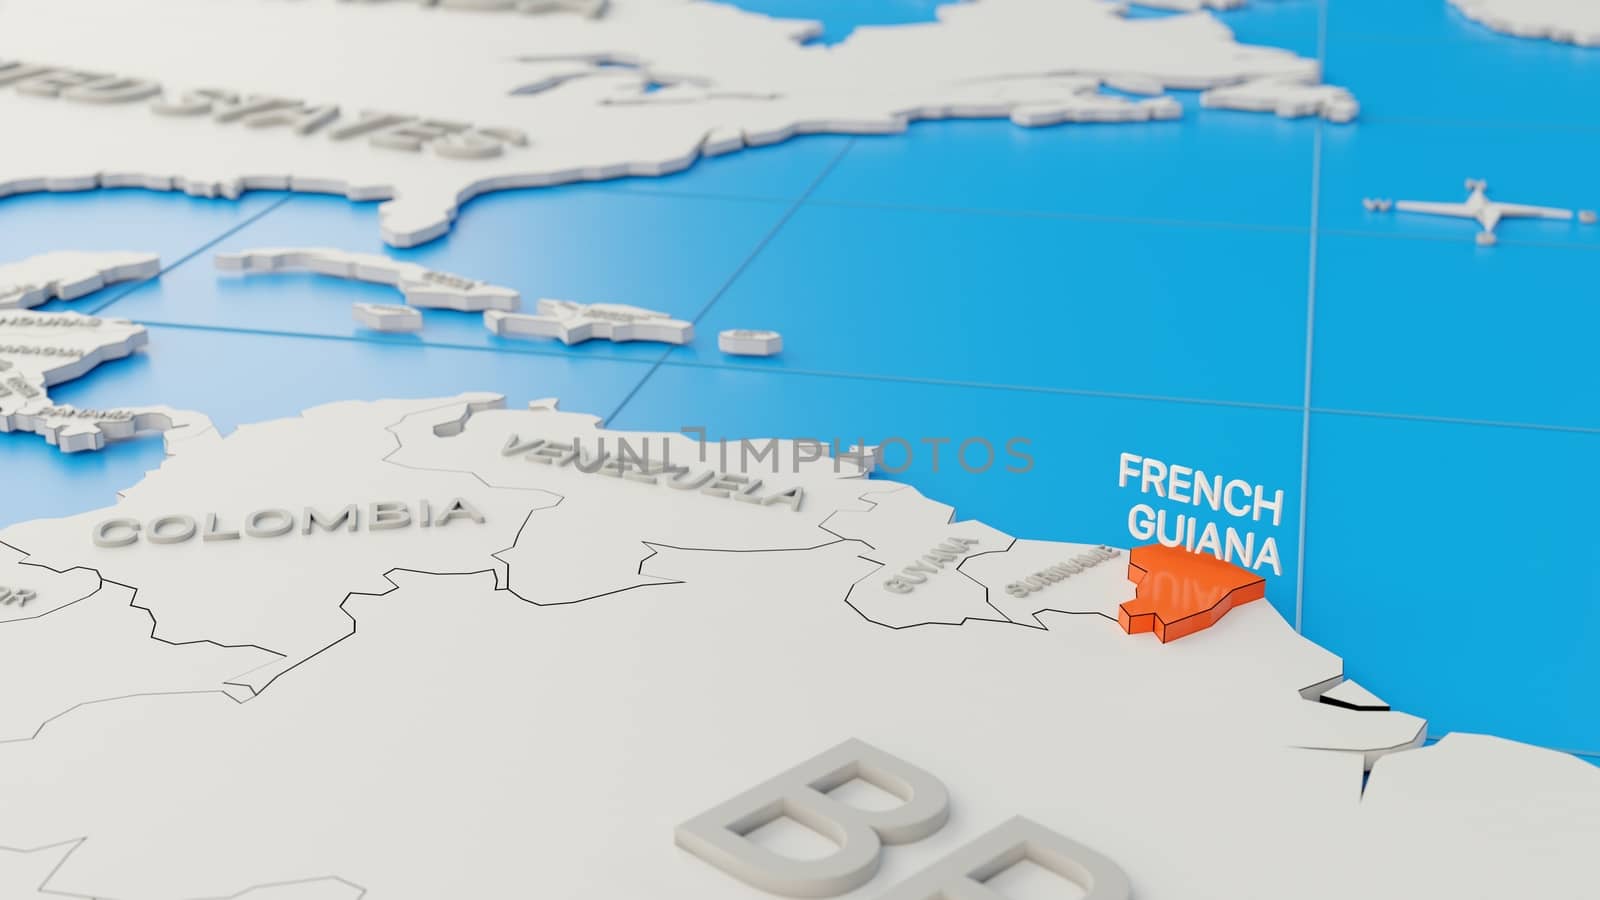 Simplified 3D map of South America, with French Guiana highlight by hernan_hyper